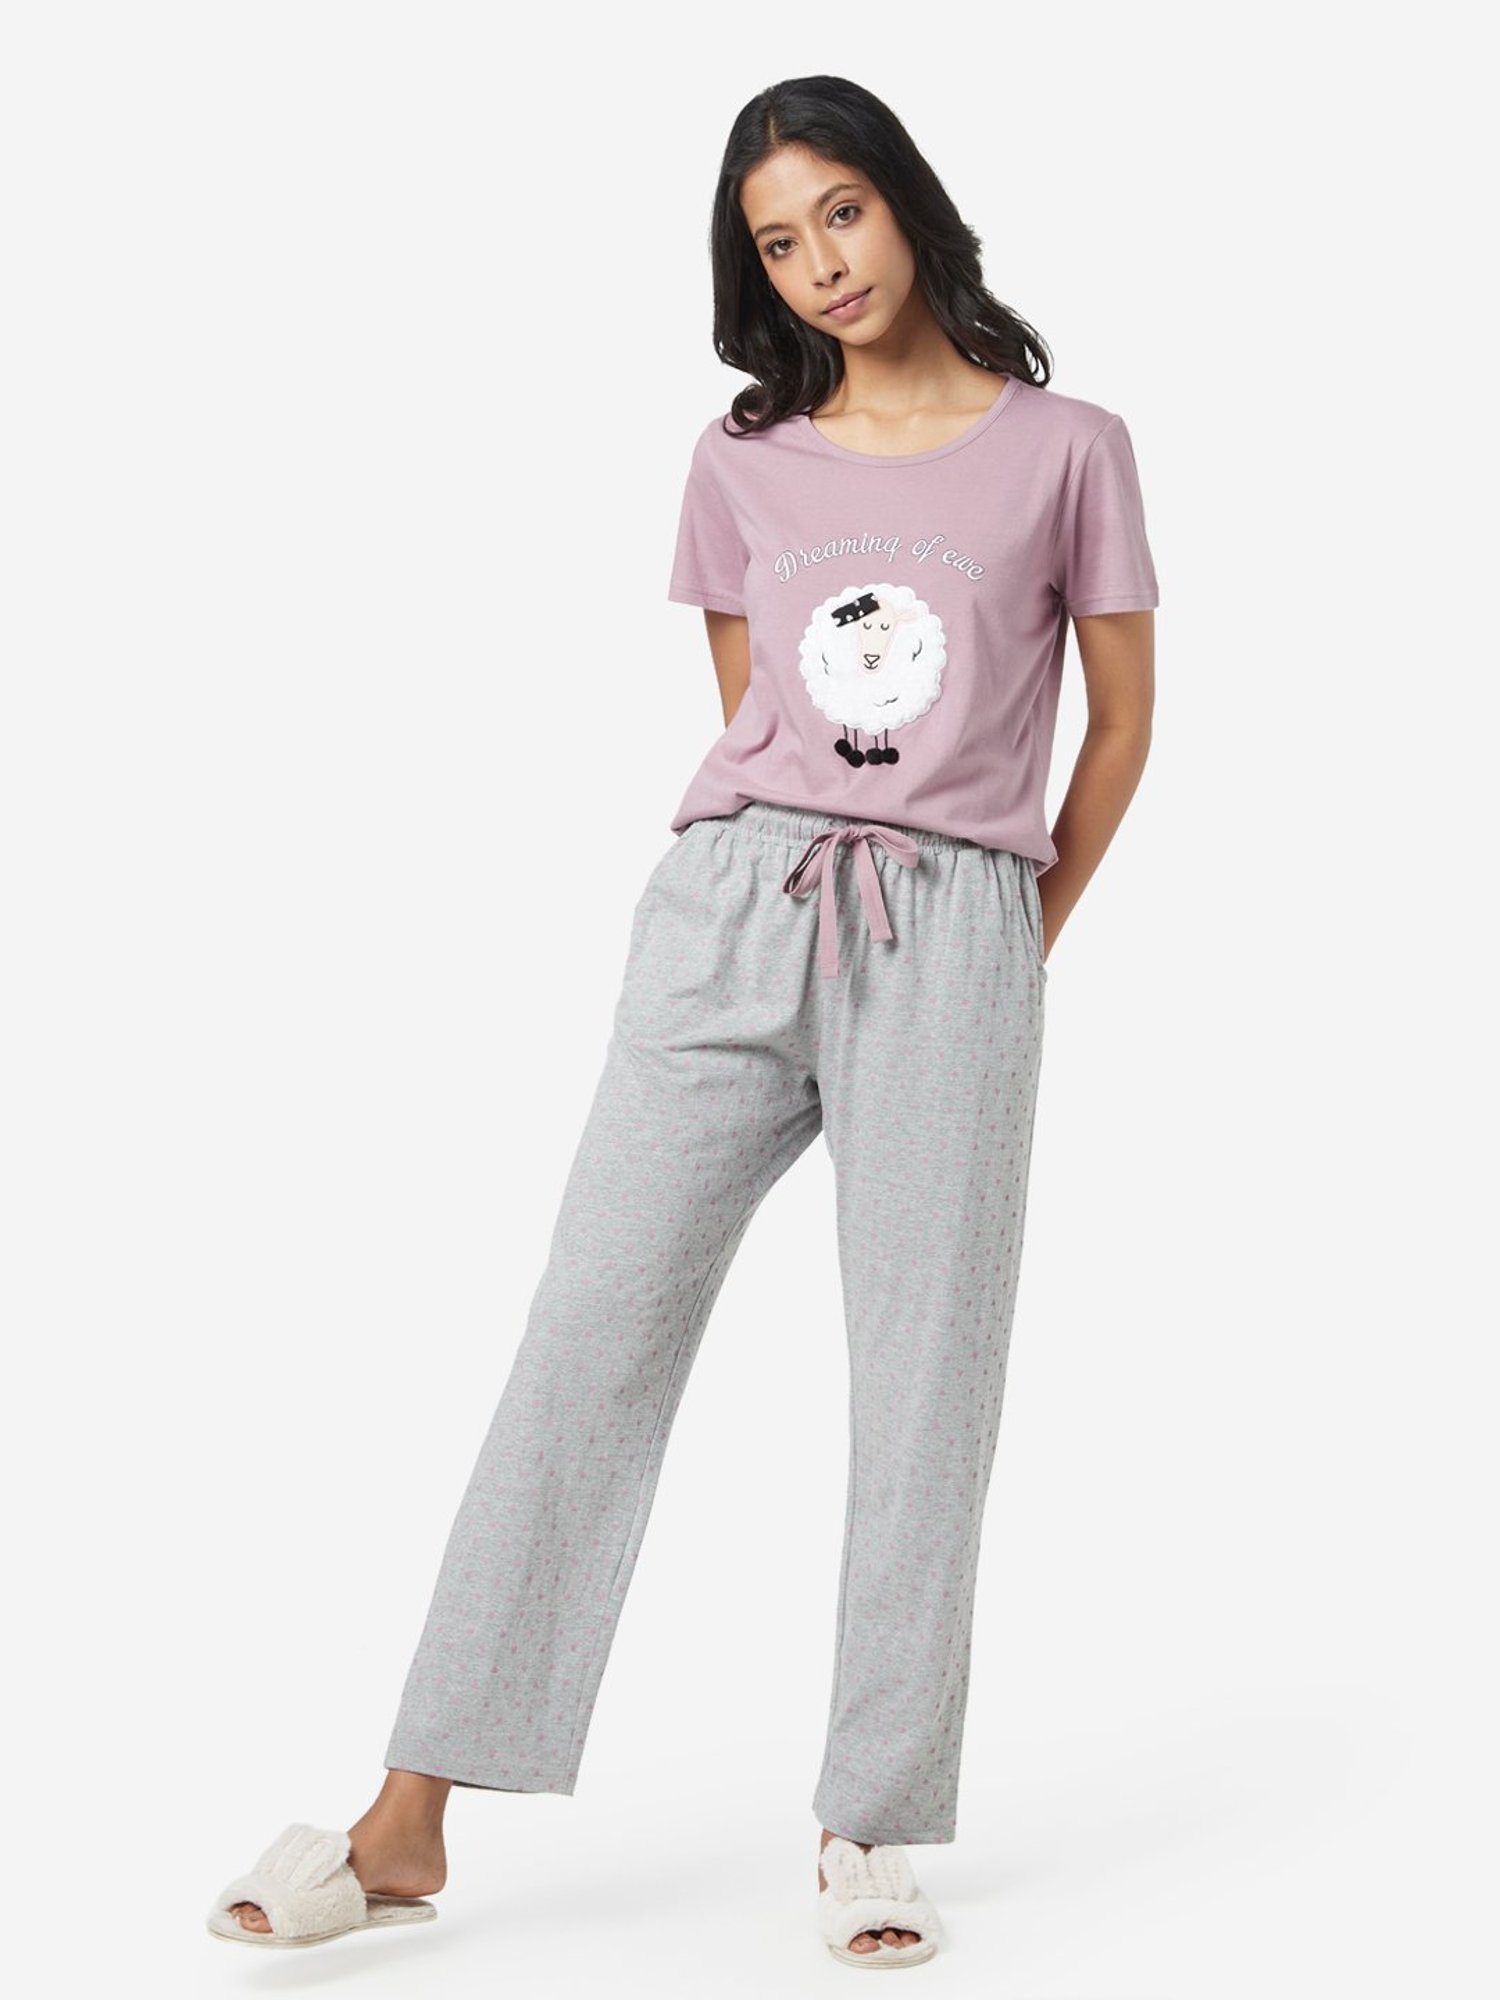 Buy Wunderlove by Westside Nude Pink Printed T-Shirt and Pyjamas Set for  Online @ Tata CLiQ